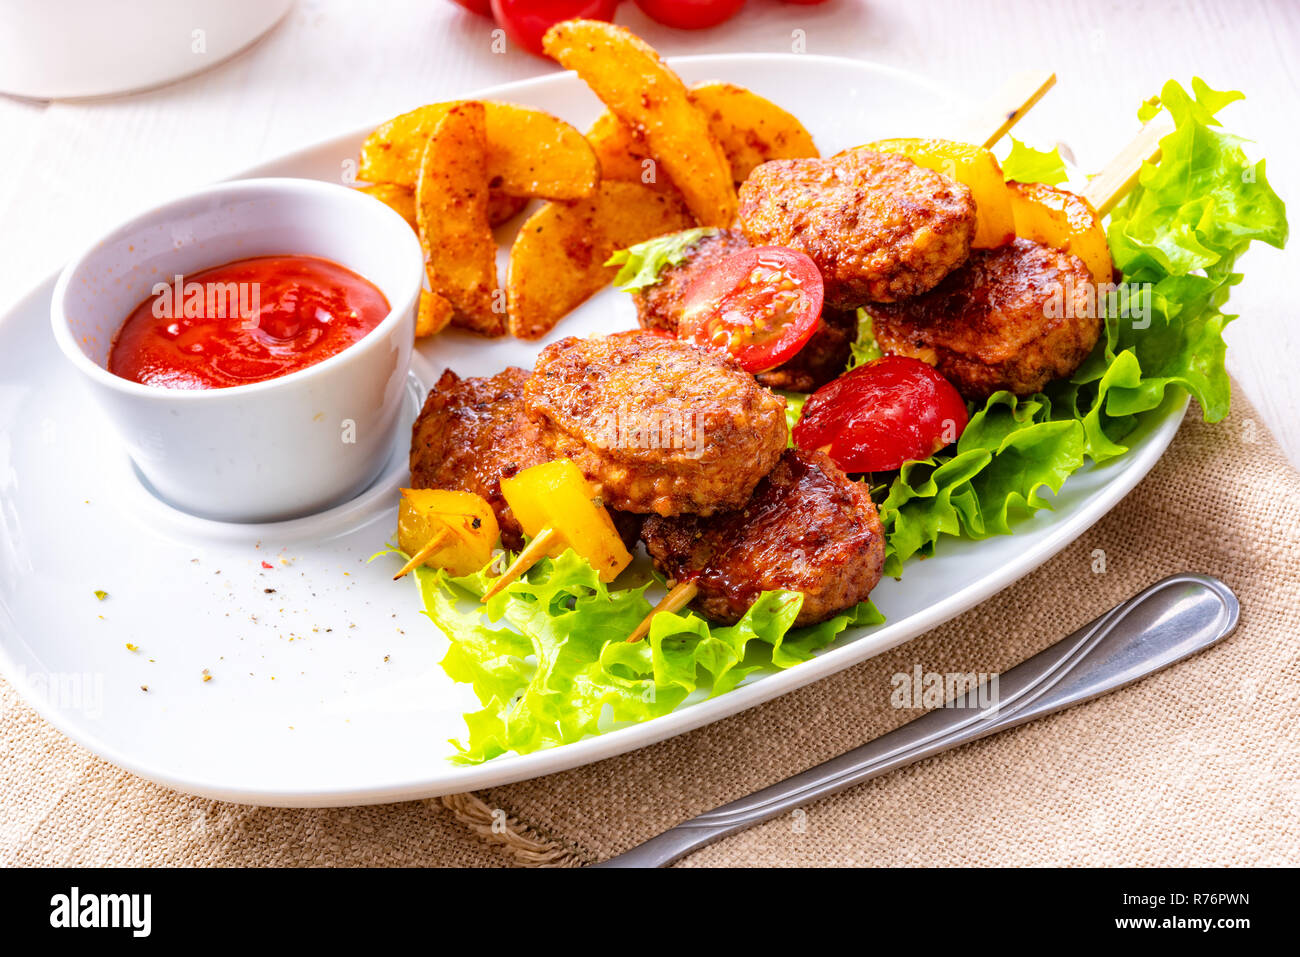 meatballs skewers of tomato,paprika and baked potato quarters Stock Photo